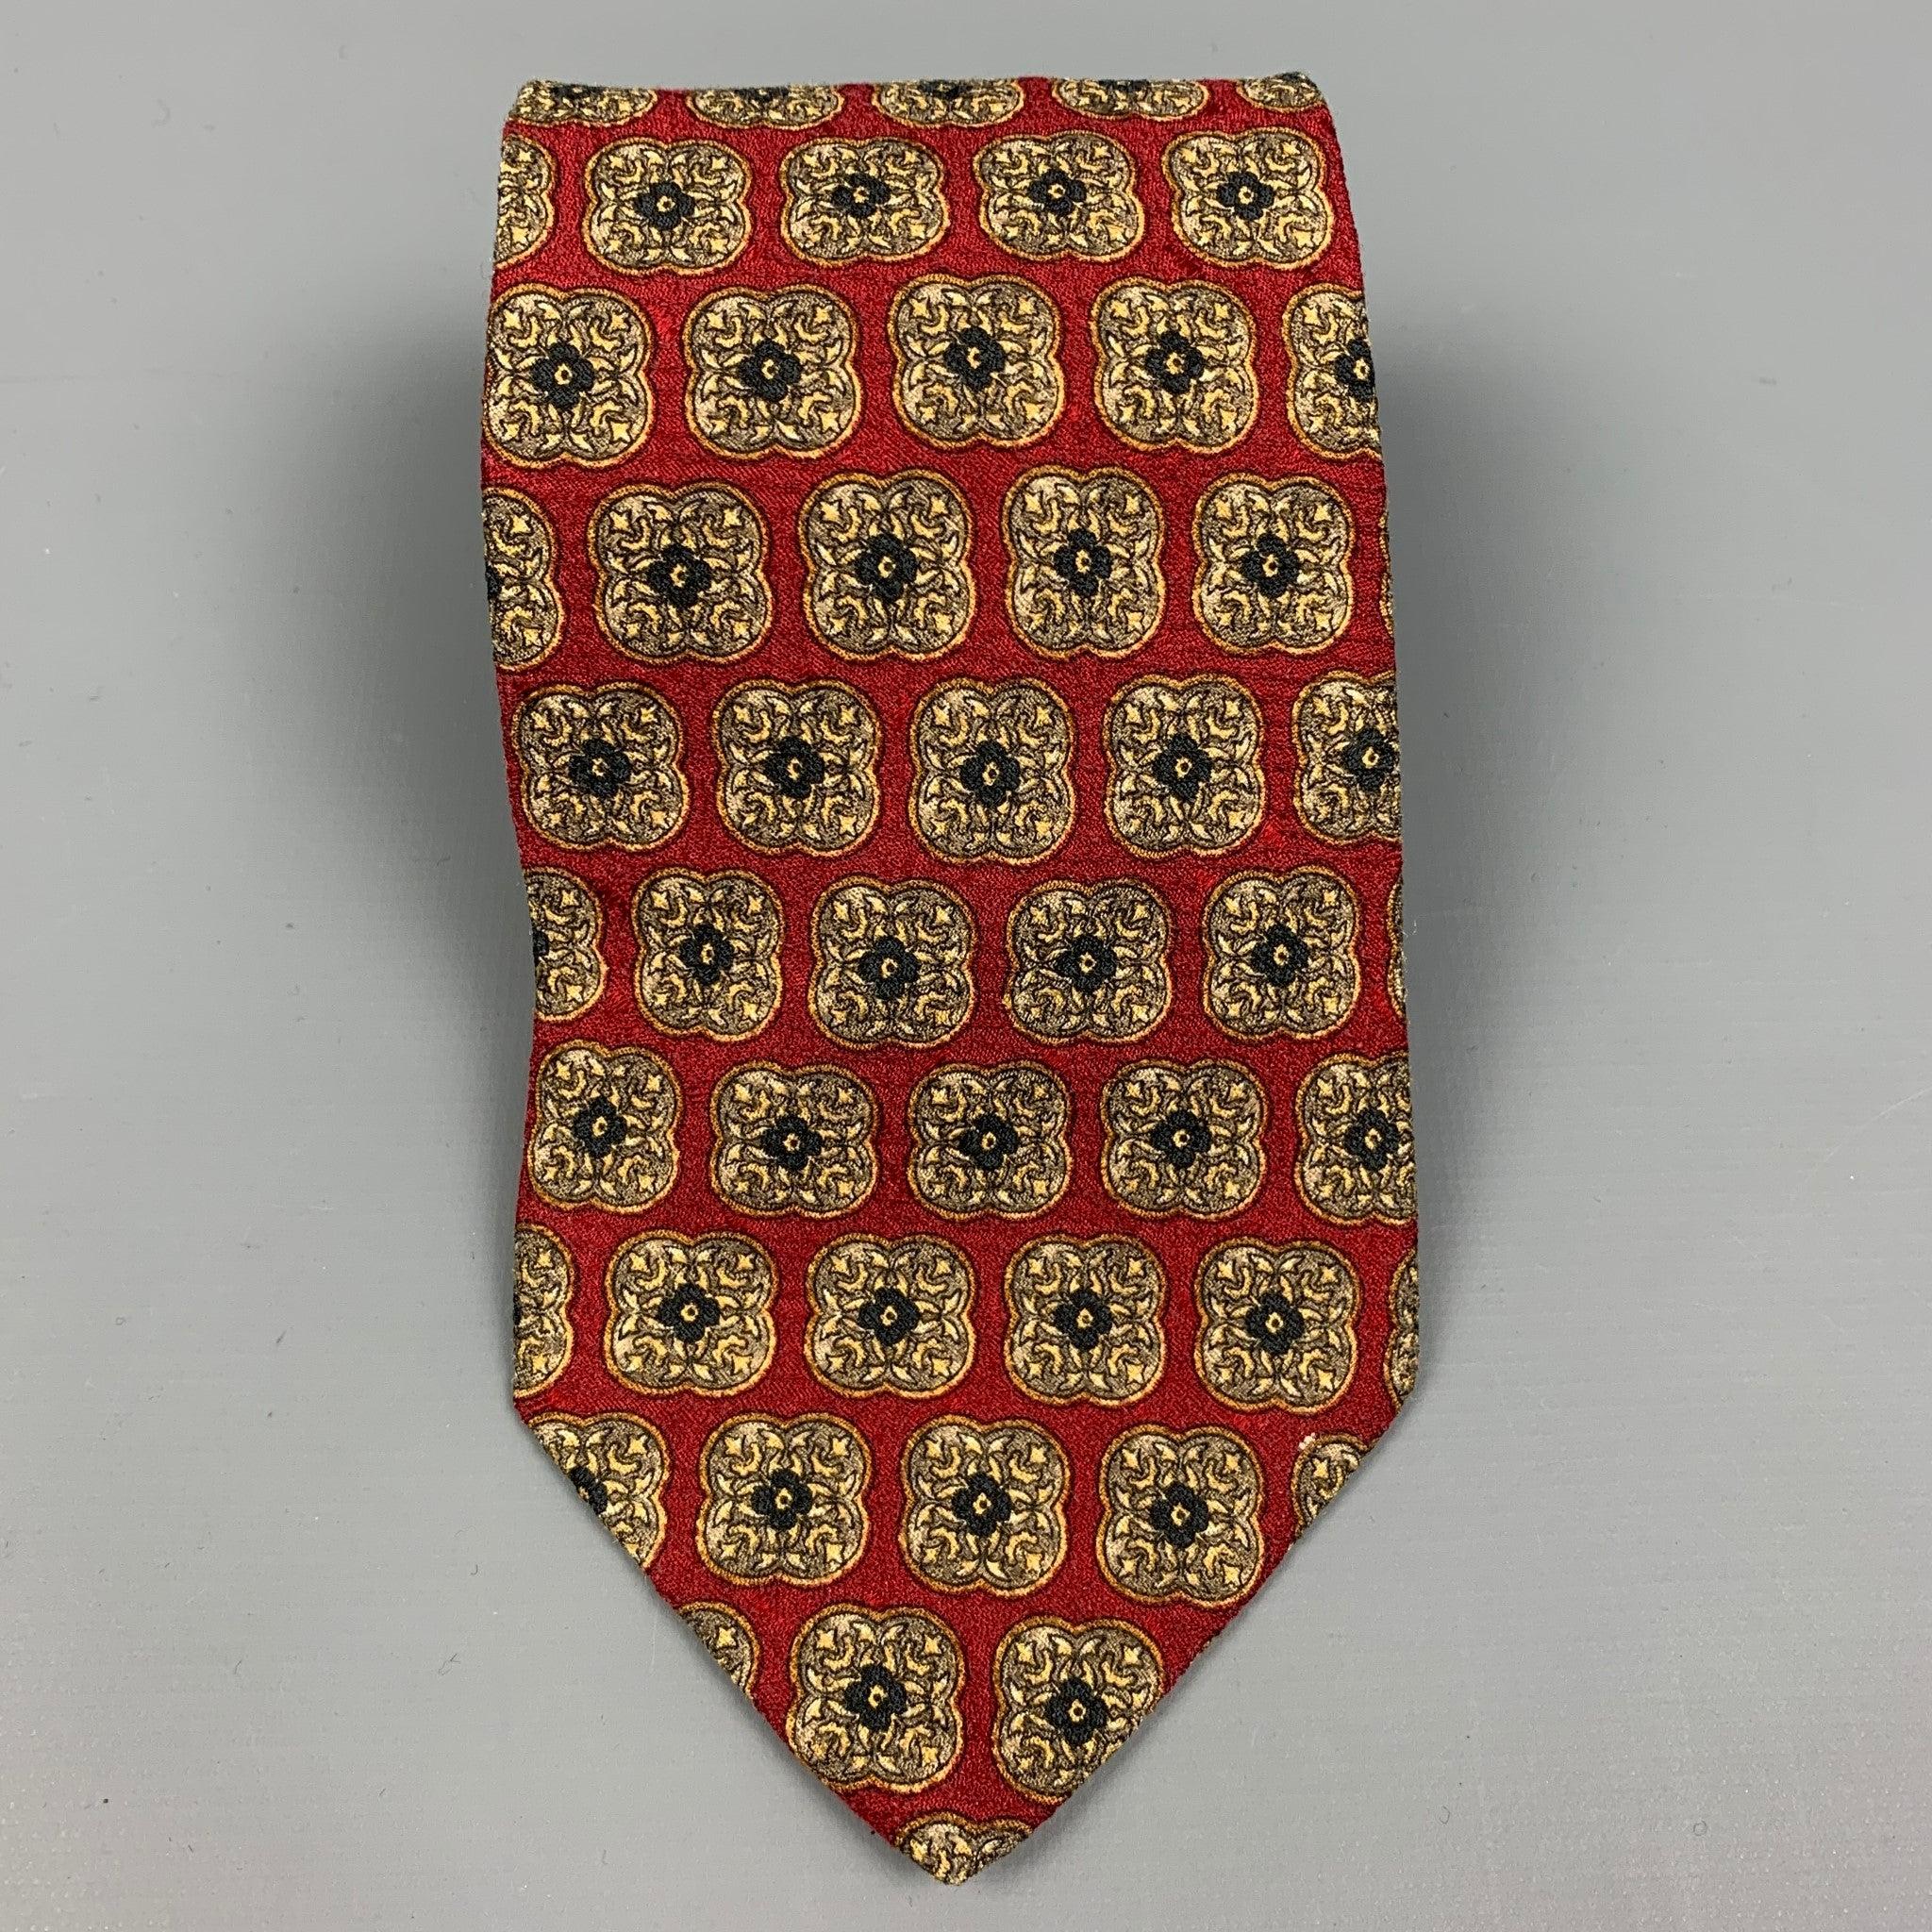 VALENTINO neck tie comes in a burgundy & taupe tapestry silk. Made in Italy.
Very Good
Pre-Owned Condition. 

Measurements: 
  Width: 4 inches 
  
  
 
Reference: 112516
Category: Tie
More Details
    
Brand:  VALENTINO
Color:  Burgundy
Color 2: 